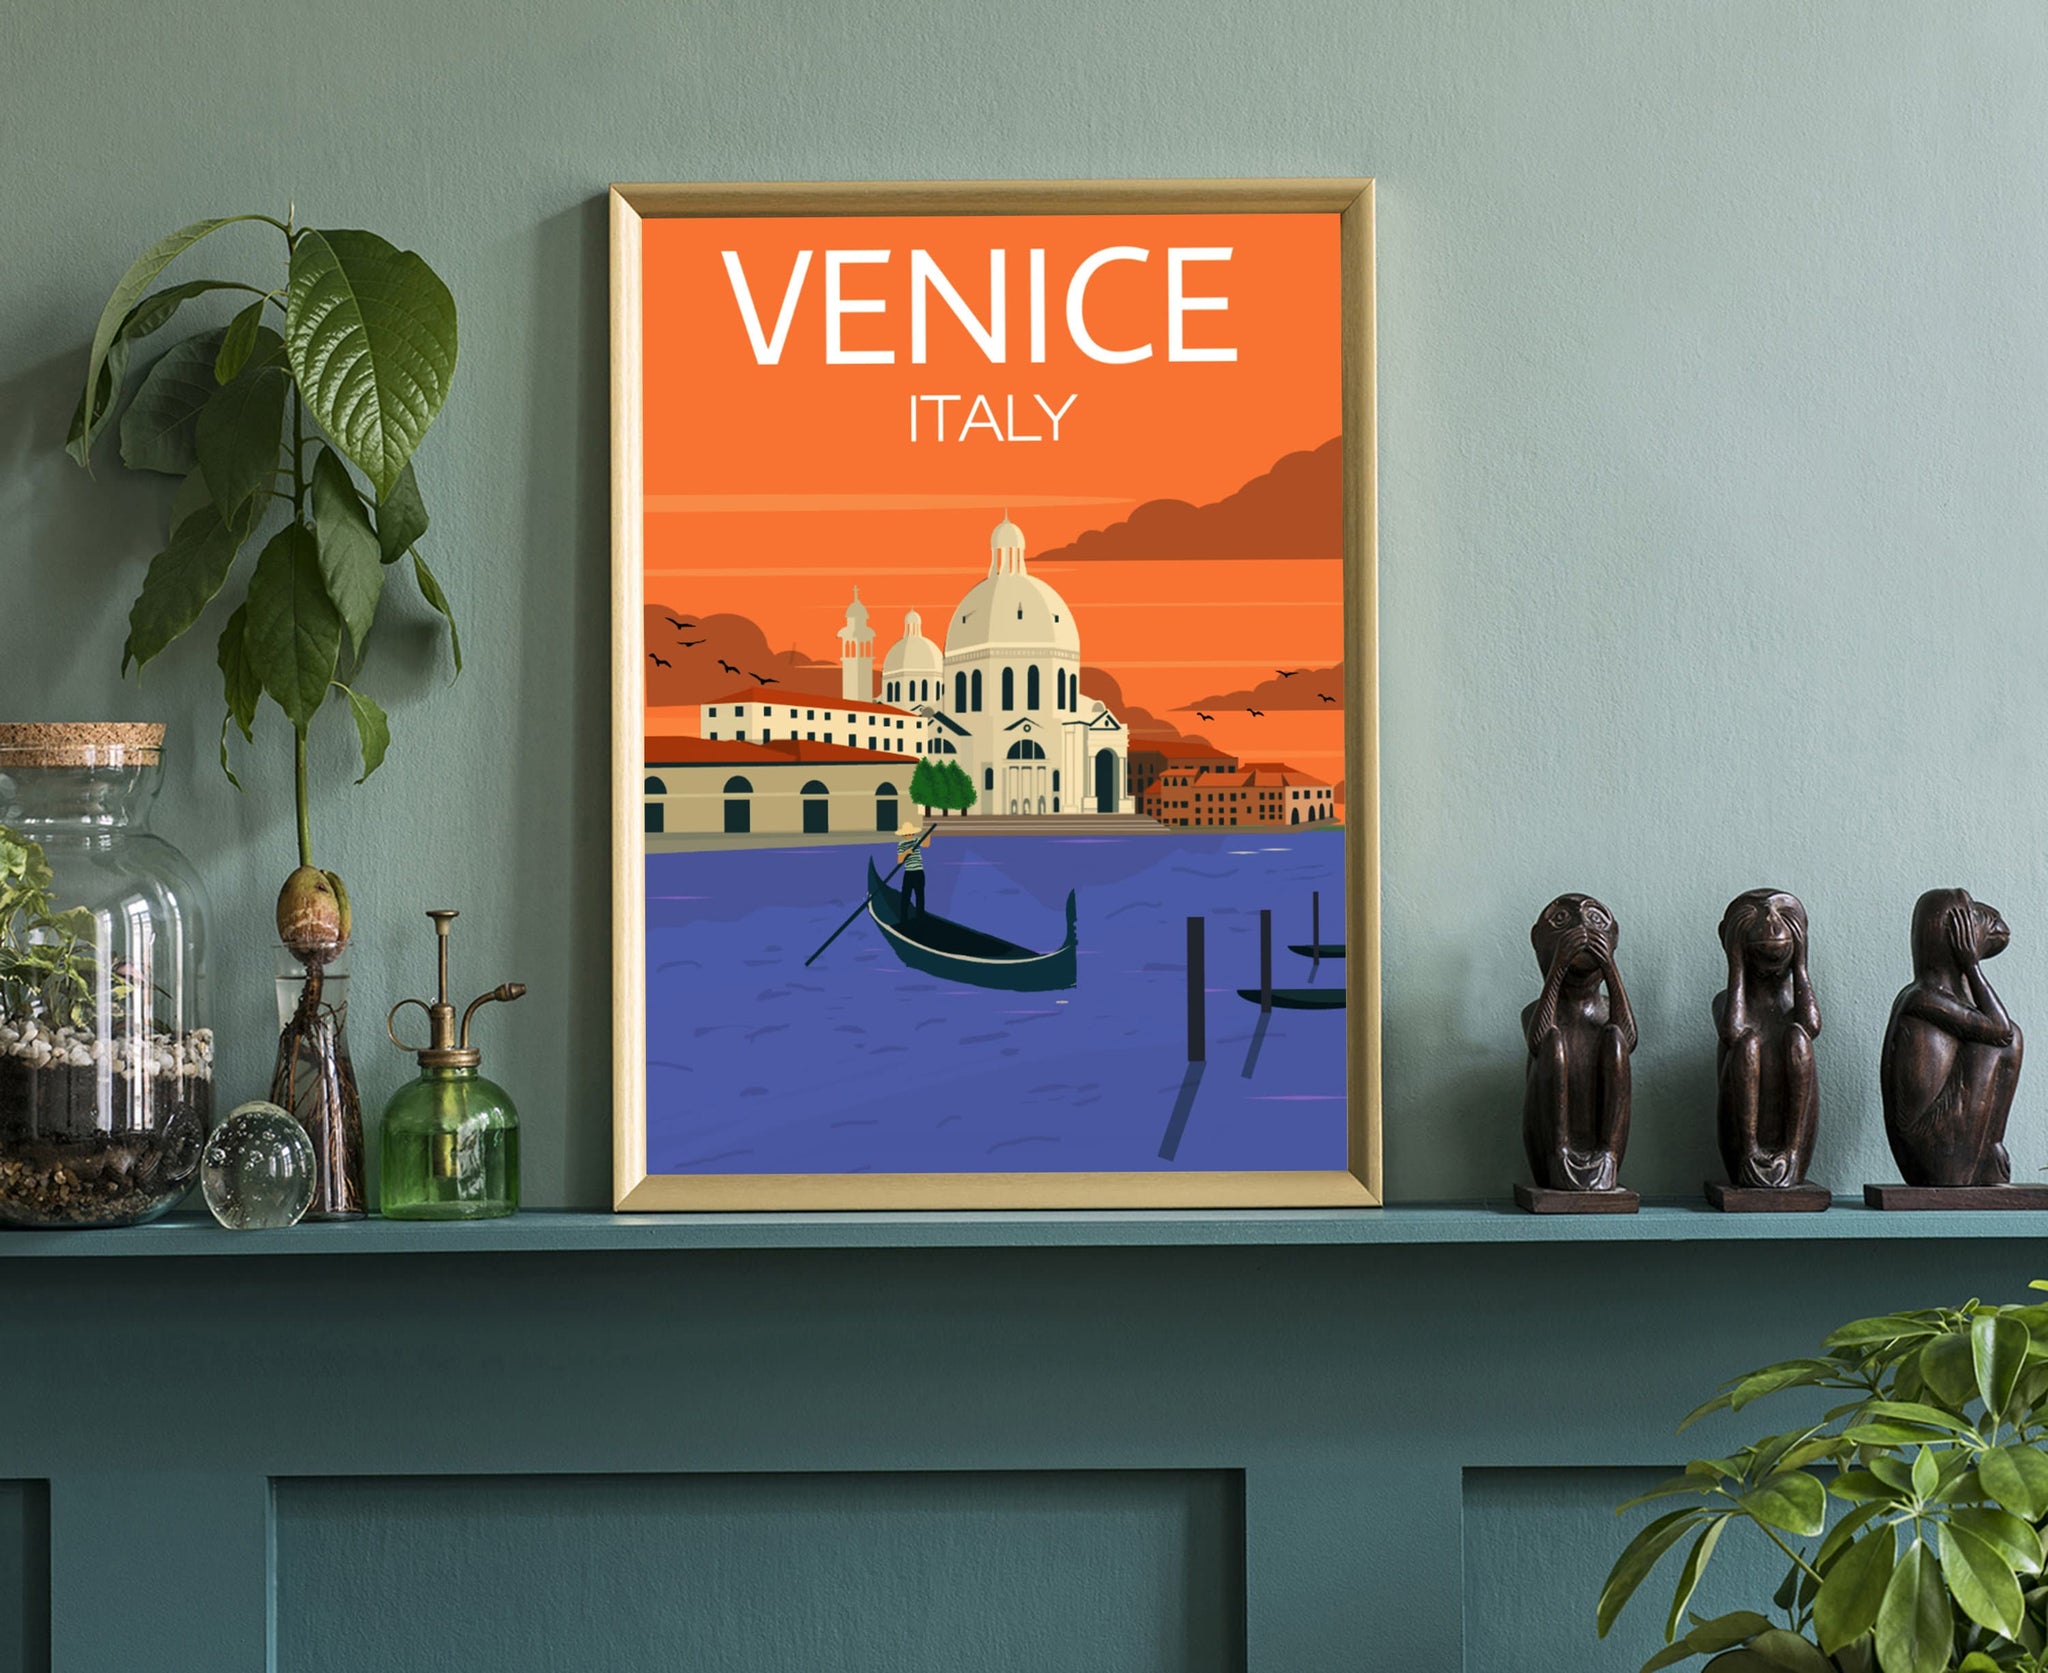 VENICE travel poster, Venice cityscape poster print, Venice Italy landmark poster wall artwork, Home wall art poster, Office wall decoration